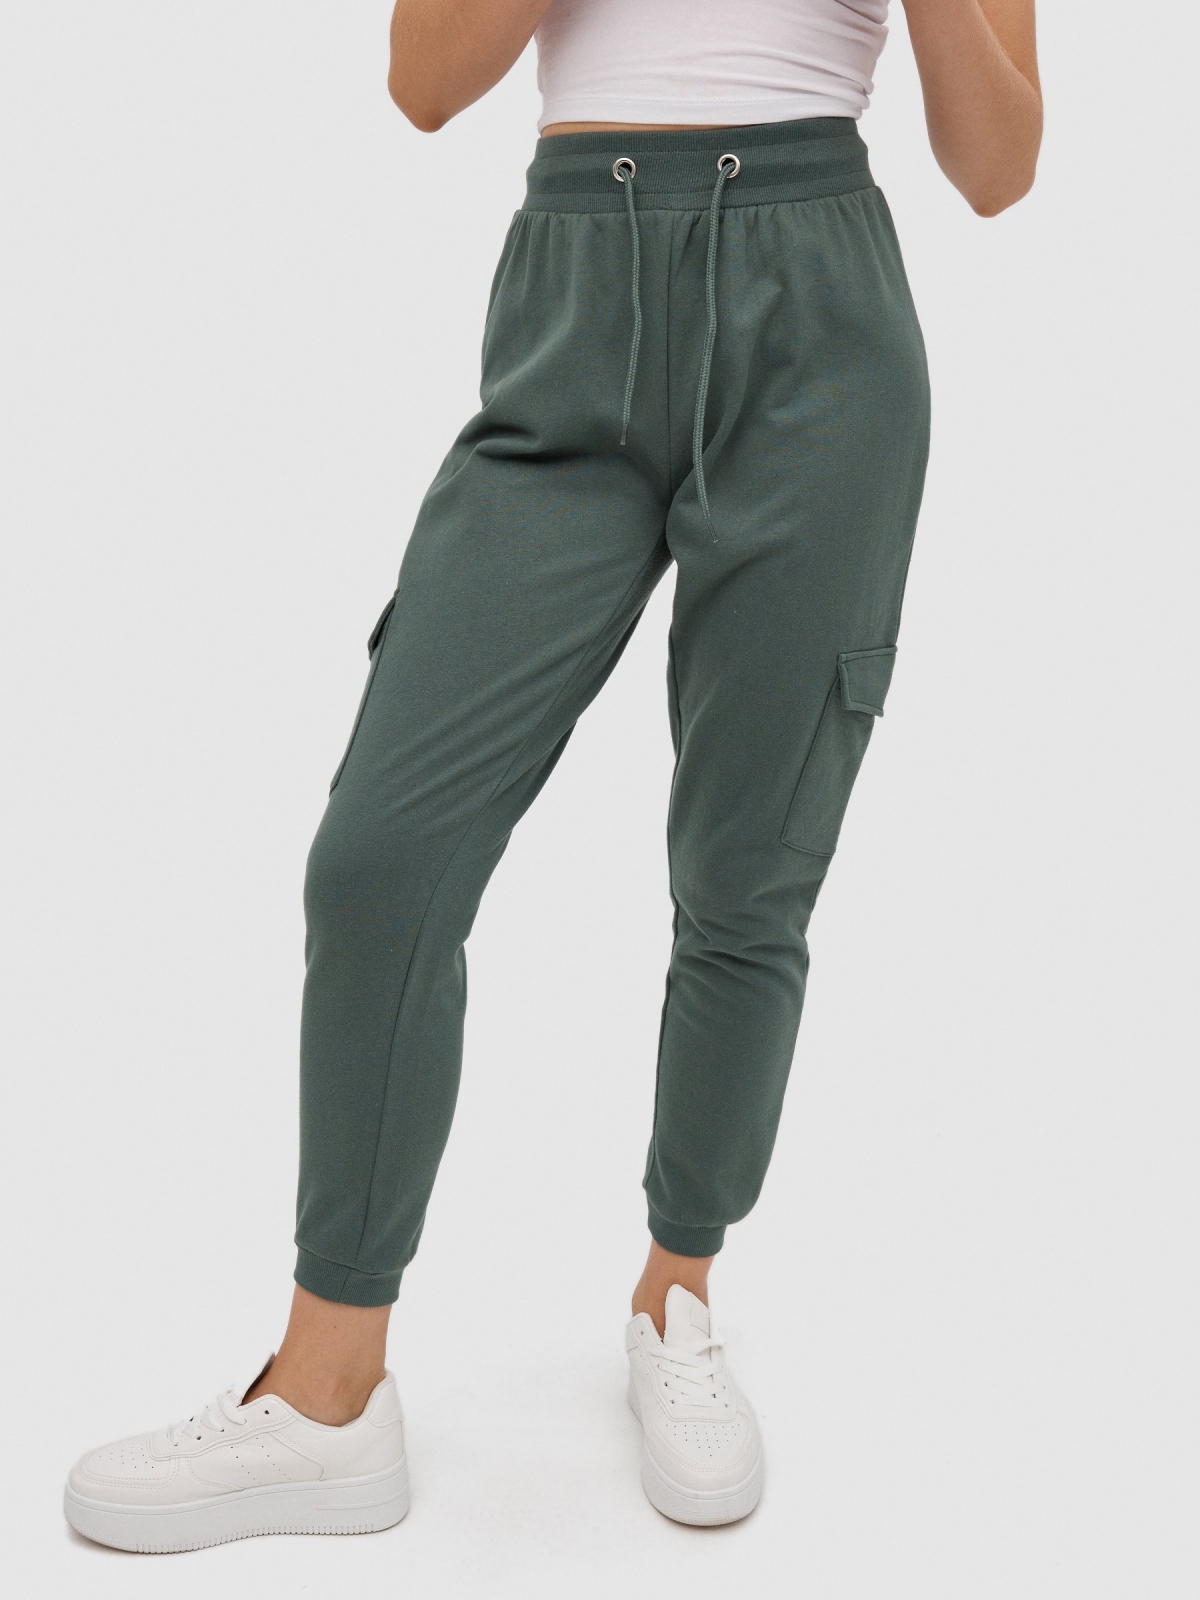 Rogaland jogger pants greyish green middle front view